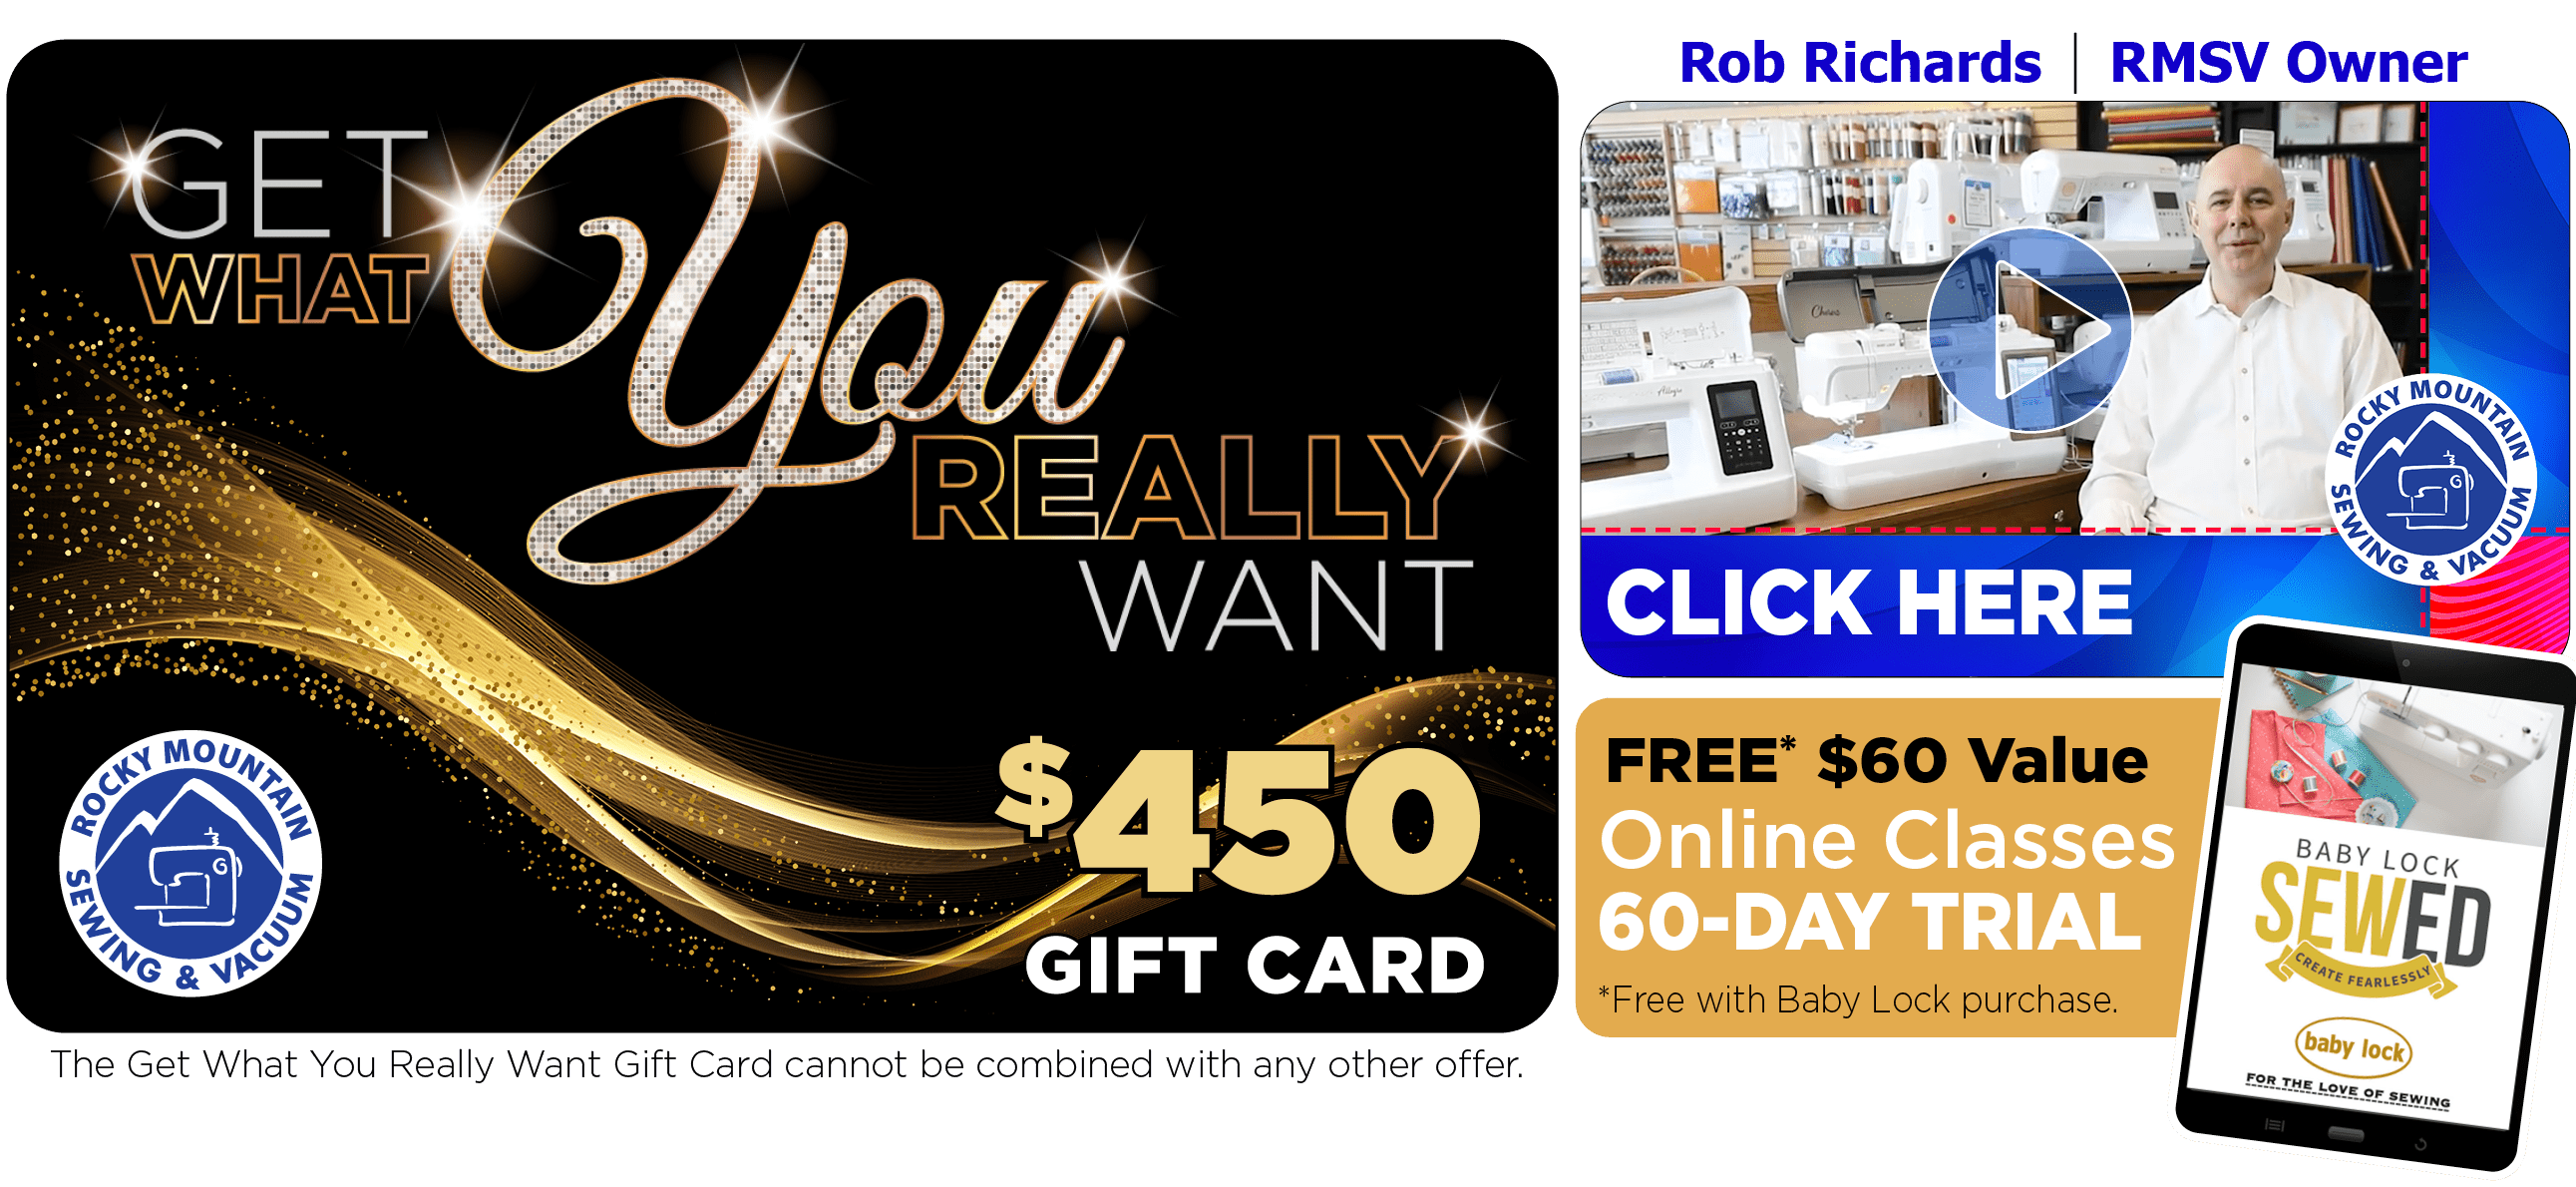 Get What You Really Want $450 Gift Card with Purchase